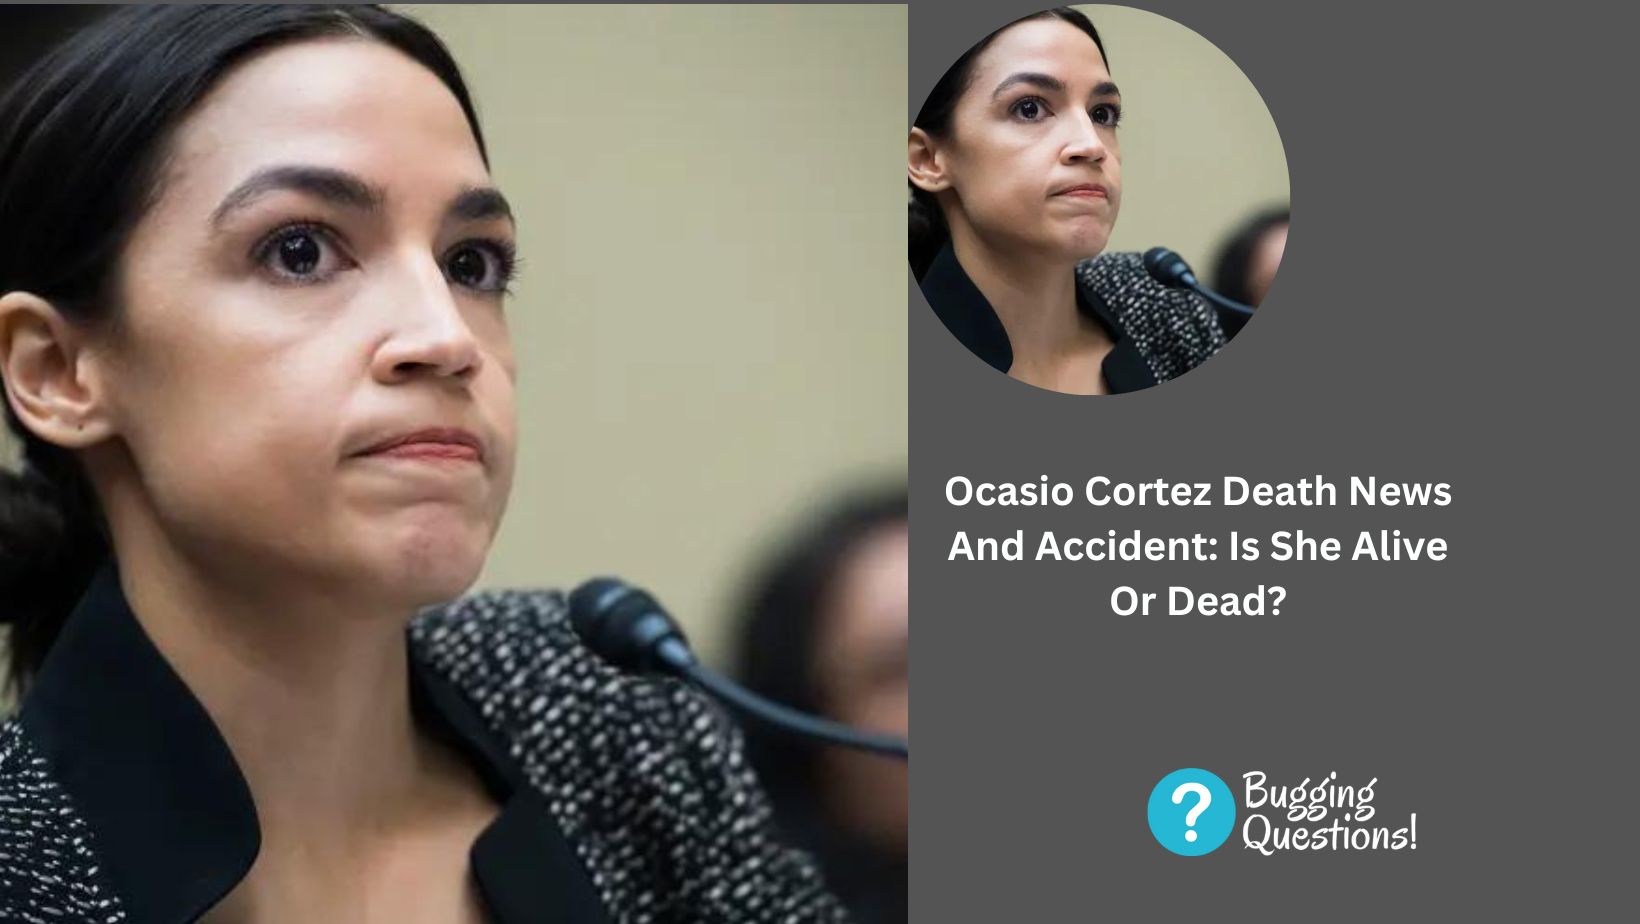 Ocasio Cortez Death News And Accident: Is She Alive Or Dead?